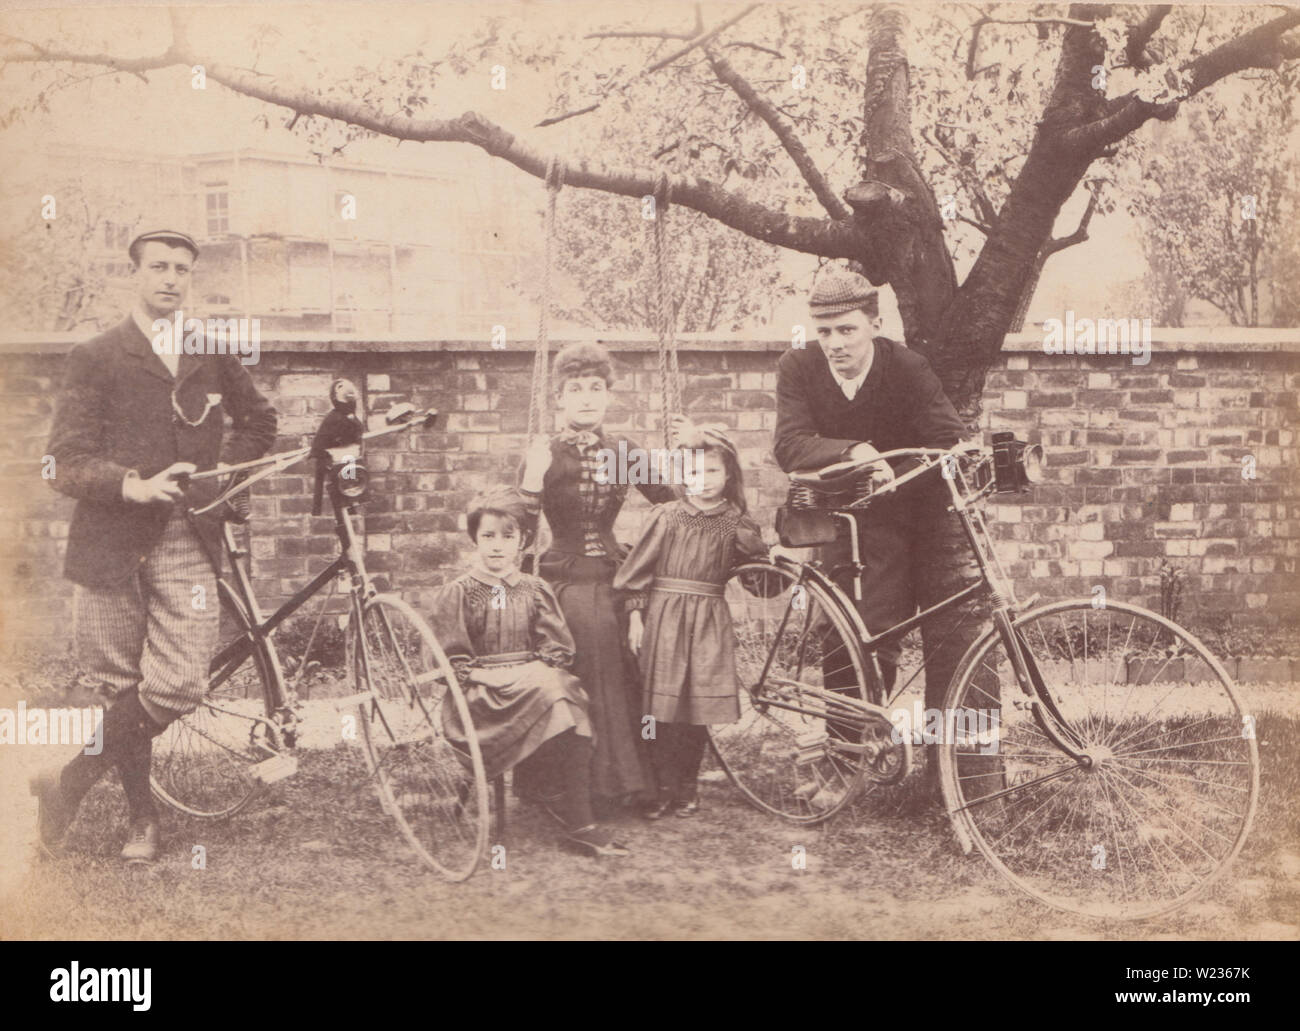 Victorian Late 1880's / Early 1890's Photograph of a Family Posing in The Garden of a House Called Pen-Isla in All Saints, Cheltenham, Gloucestershire. Lady Sat on a Tree Swing and Men Posing With Their Bicycles. This House is now No's 11 & 13 All Saints Villas Road, Cheltenham. Stock Photo